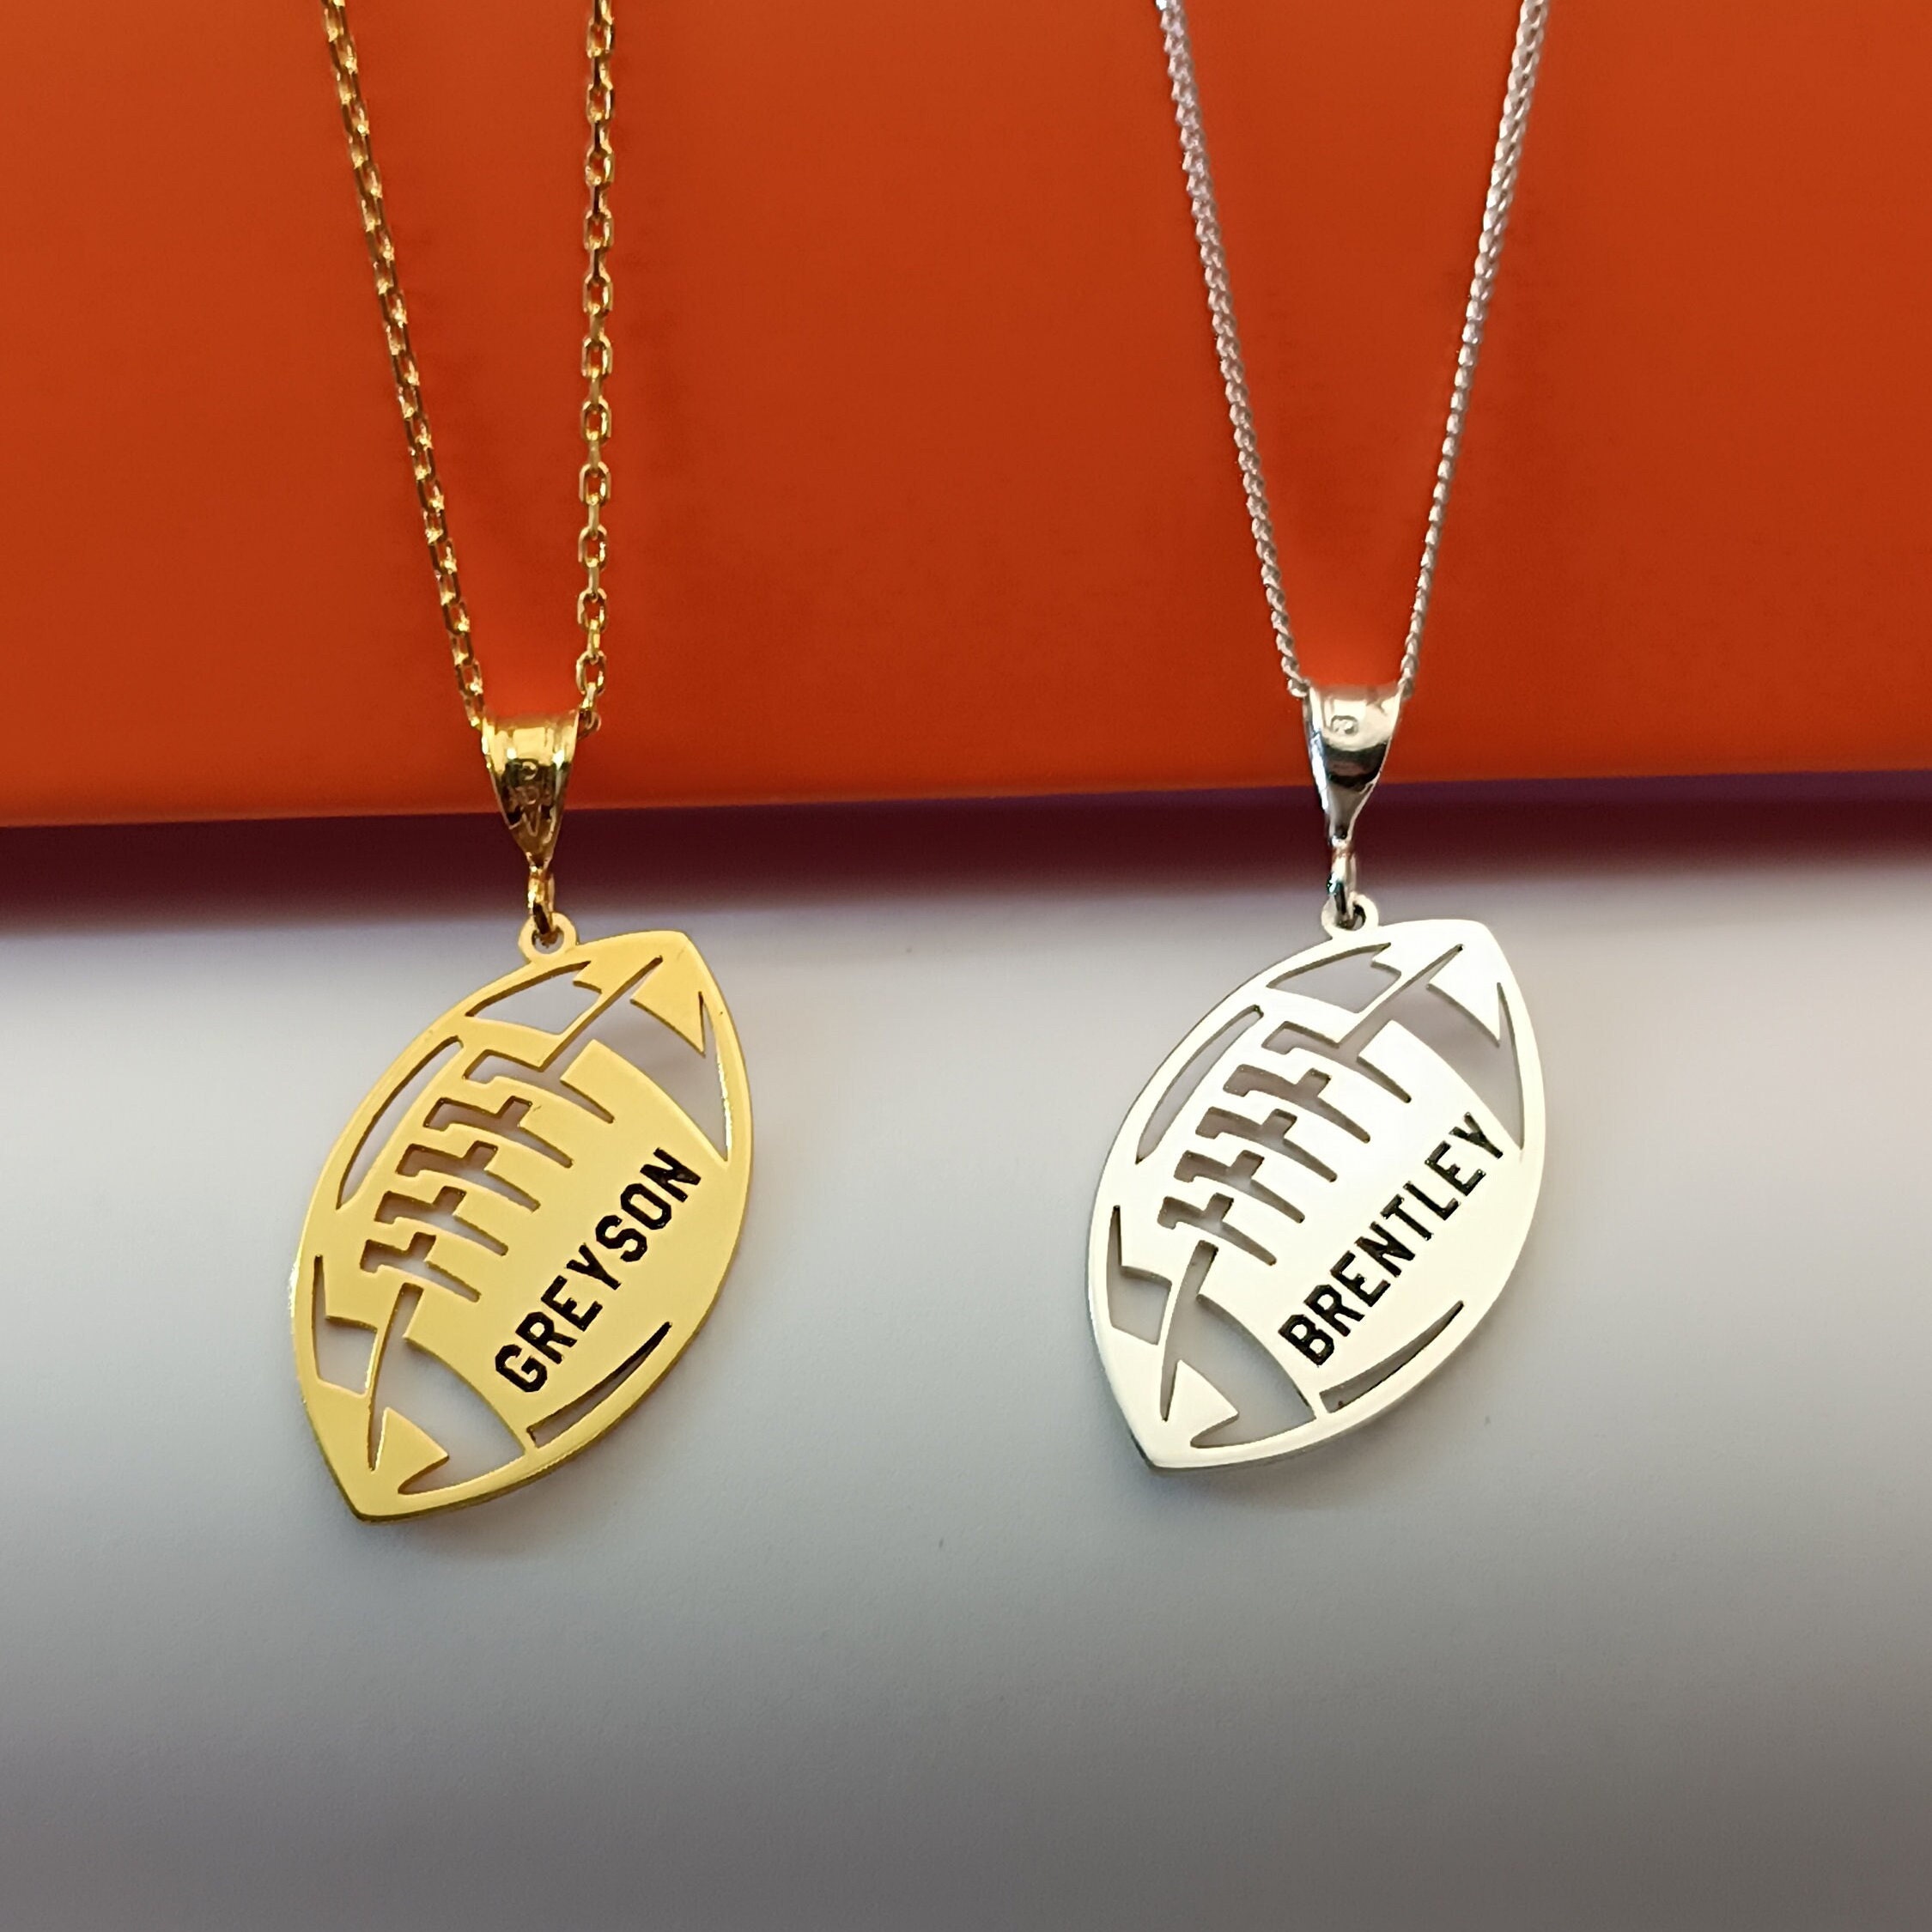 Personalized Football Helmet Number And Name Pendants - Quality Gold